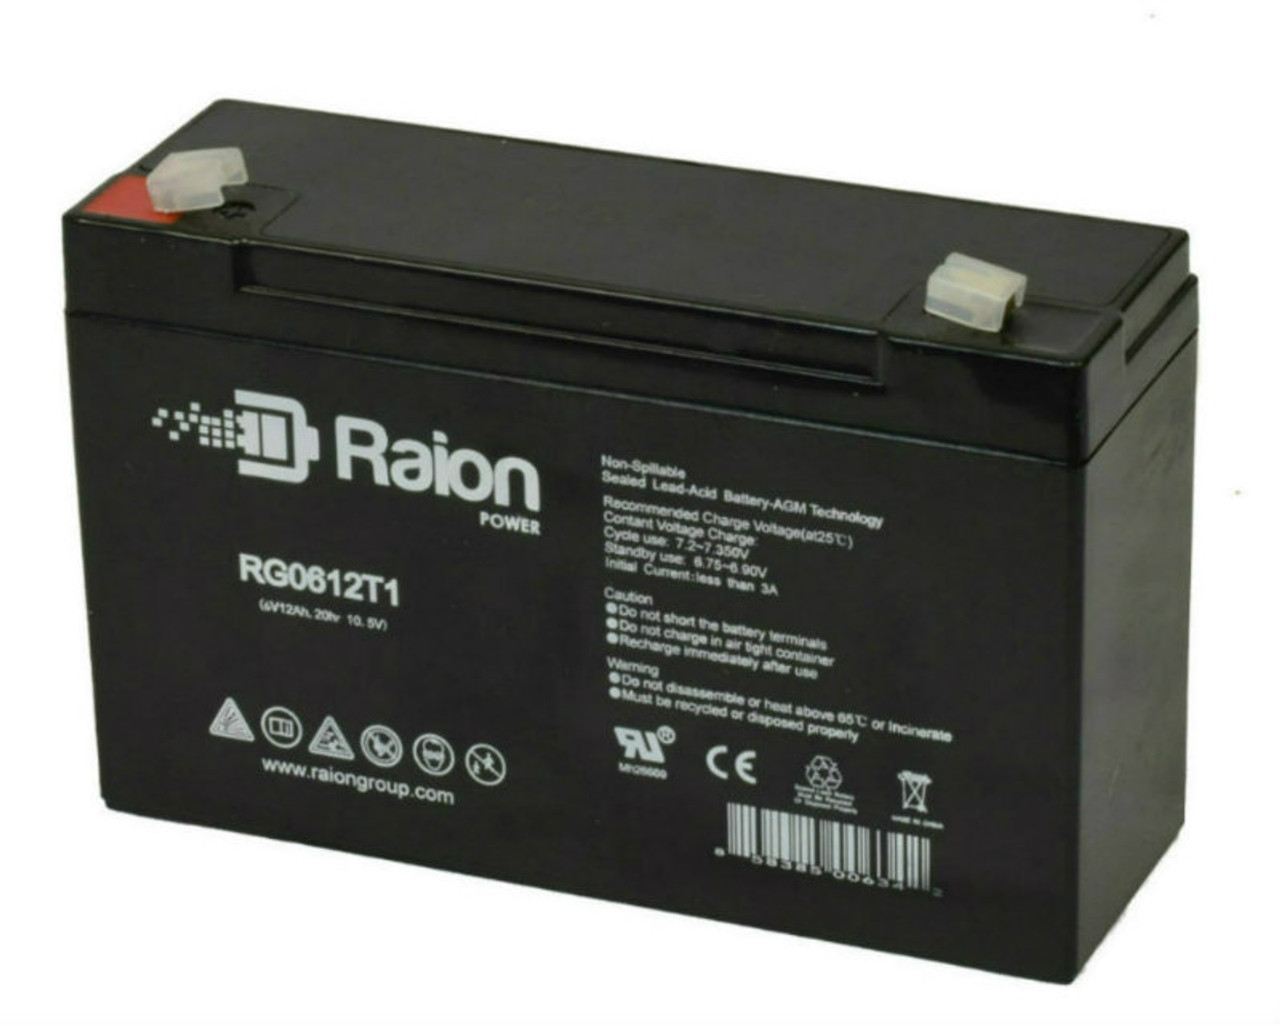 Raion Power RG06120T1 Replacement Emergency Light Battery for Teledyne H2SE12S10